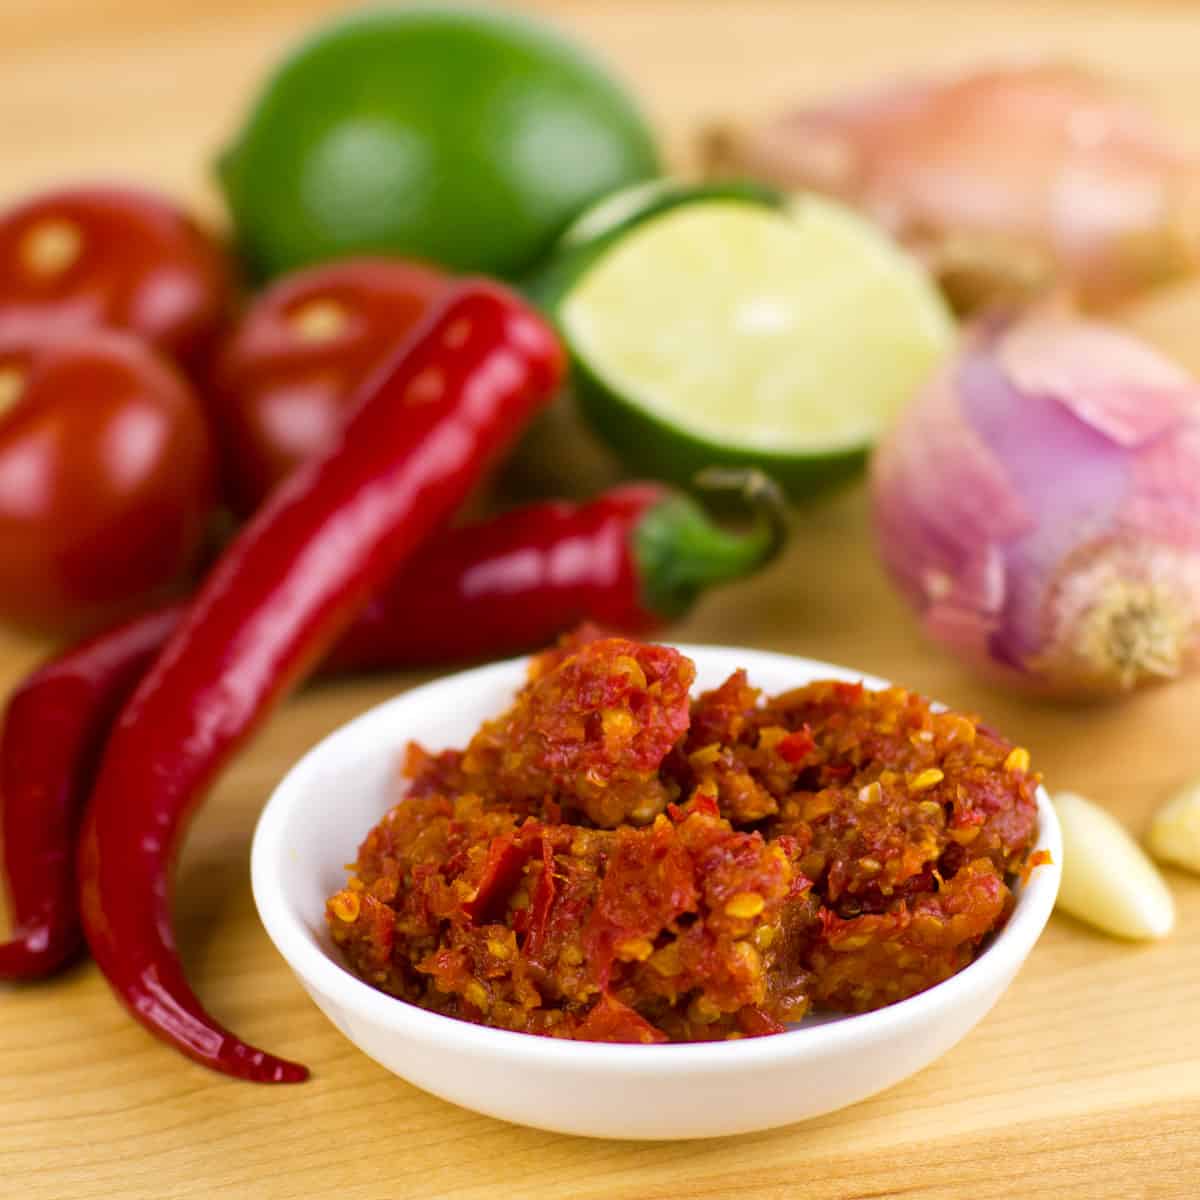 A bowl of chili paste surrounded by vegetables.